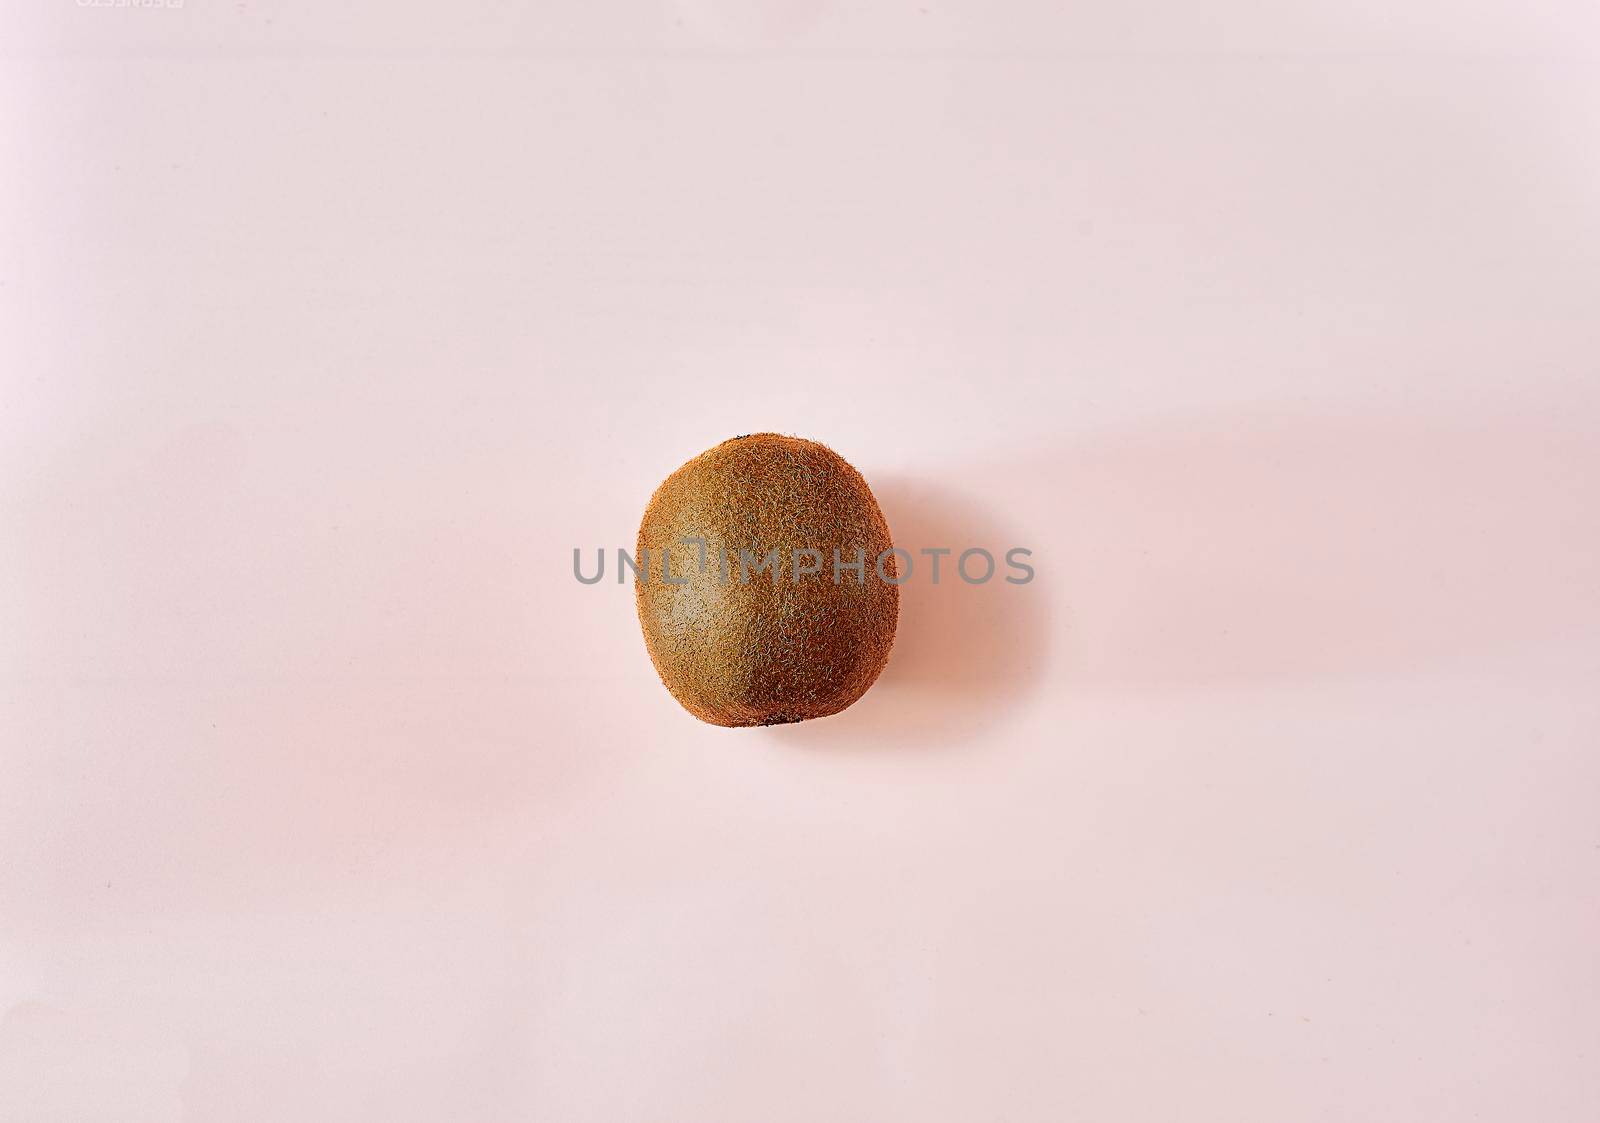 Kiwi in the middle of a white background. unique, bright, clean, empty space.